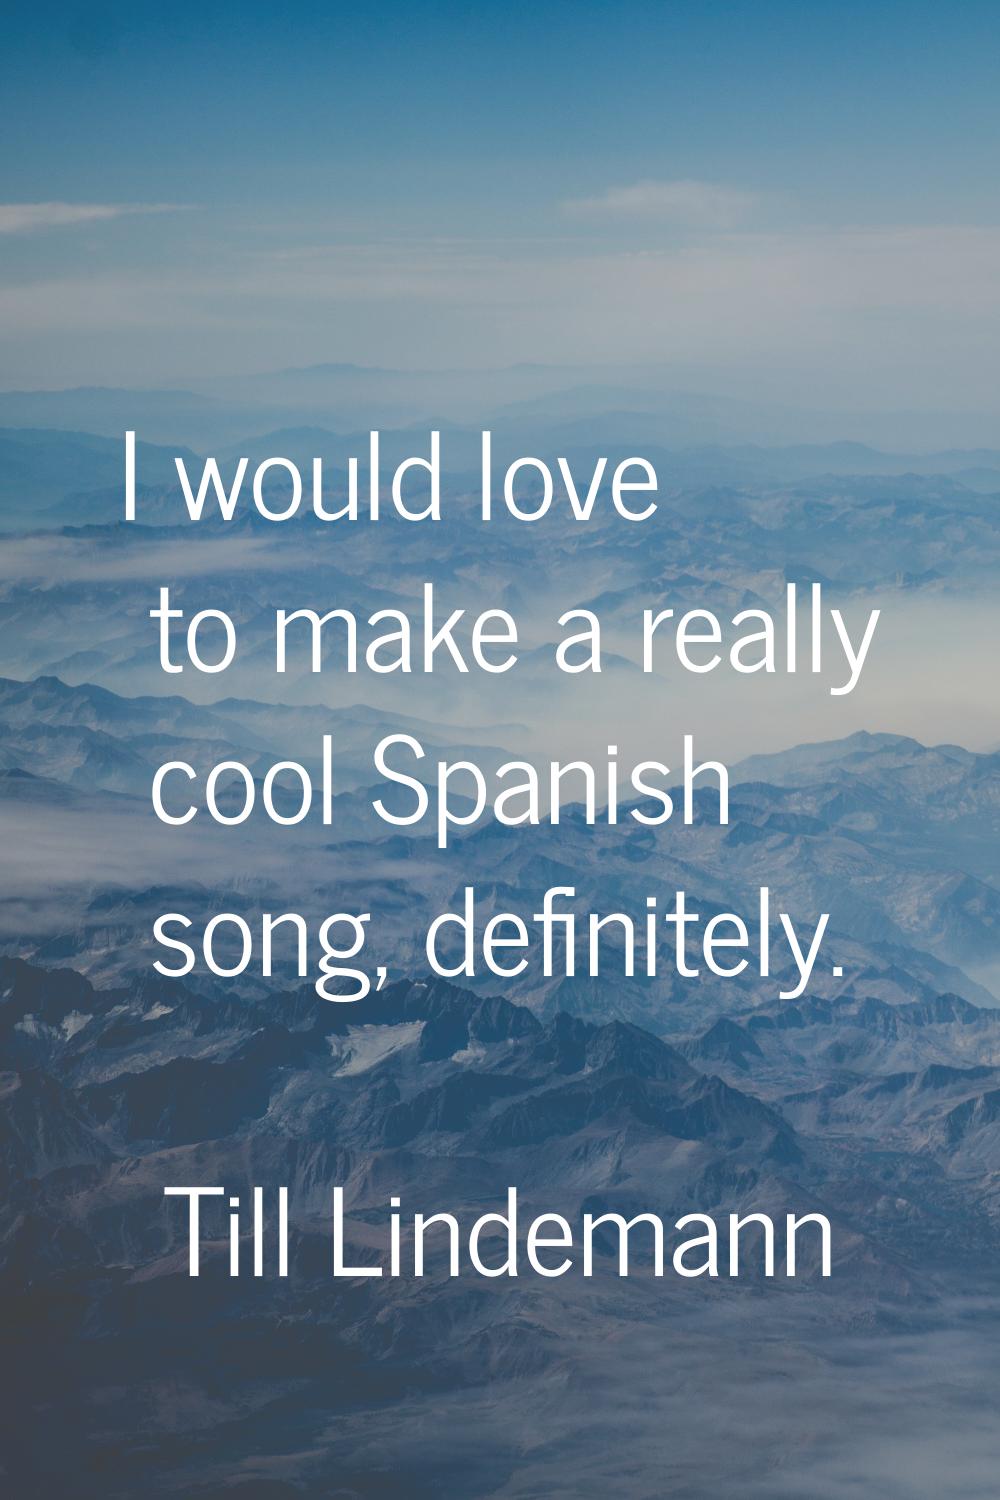 I would love to make a really cool Spanish song, definitely.